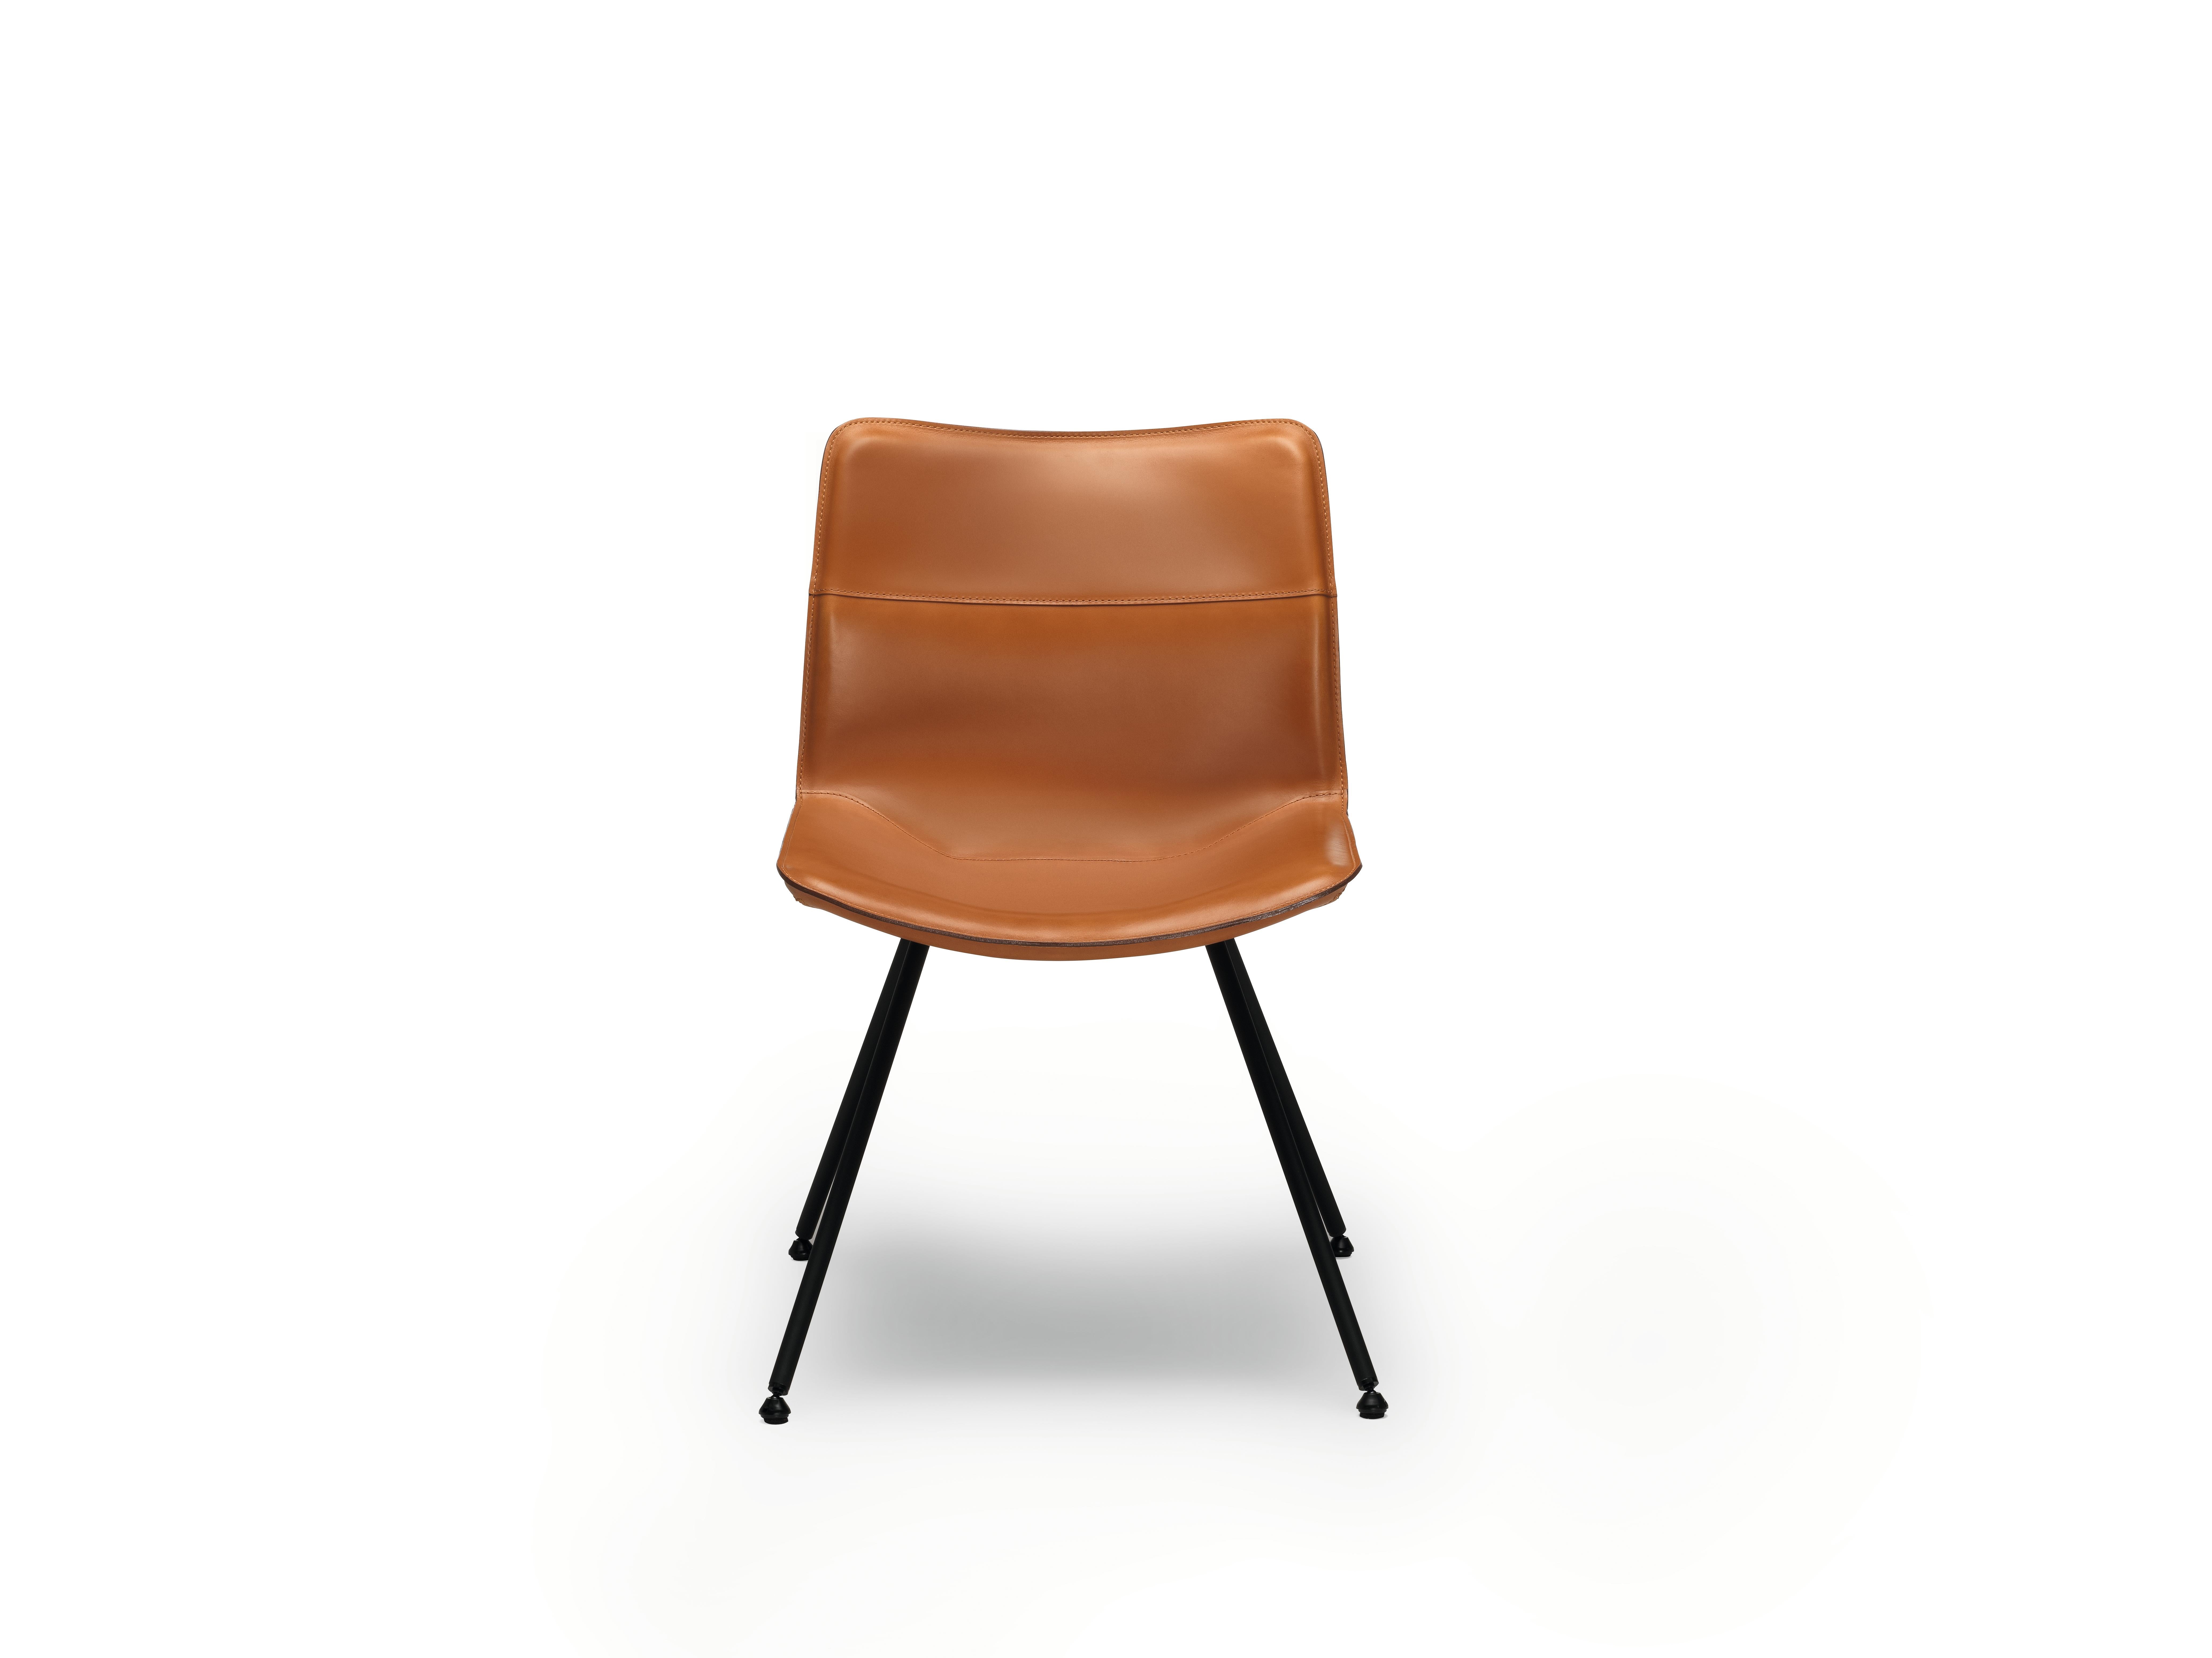 Zanotta Dan Chair in Brown Cowhide and Matt Black Steel Frame by Patrick Norguet

Steel frame varnished iron grey or matt black. Seat and backrest upholstered with polyurethane. Fixed internal nylon cover. Non removable external cover in cowhide